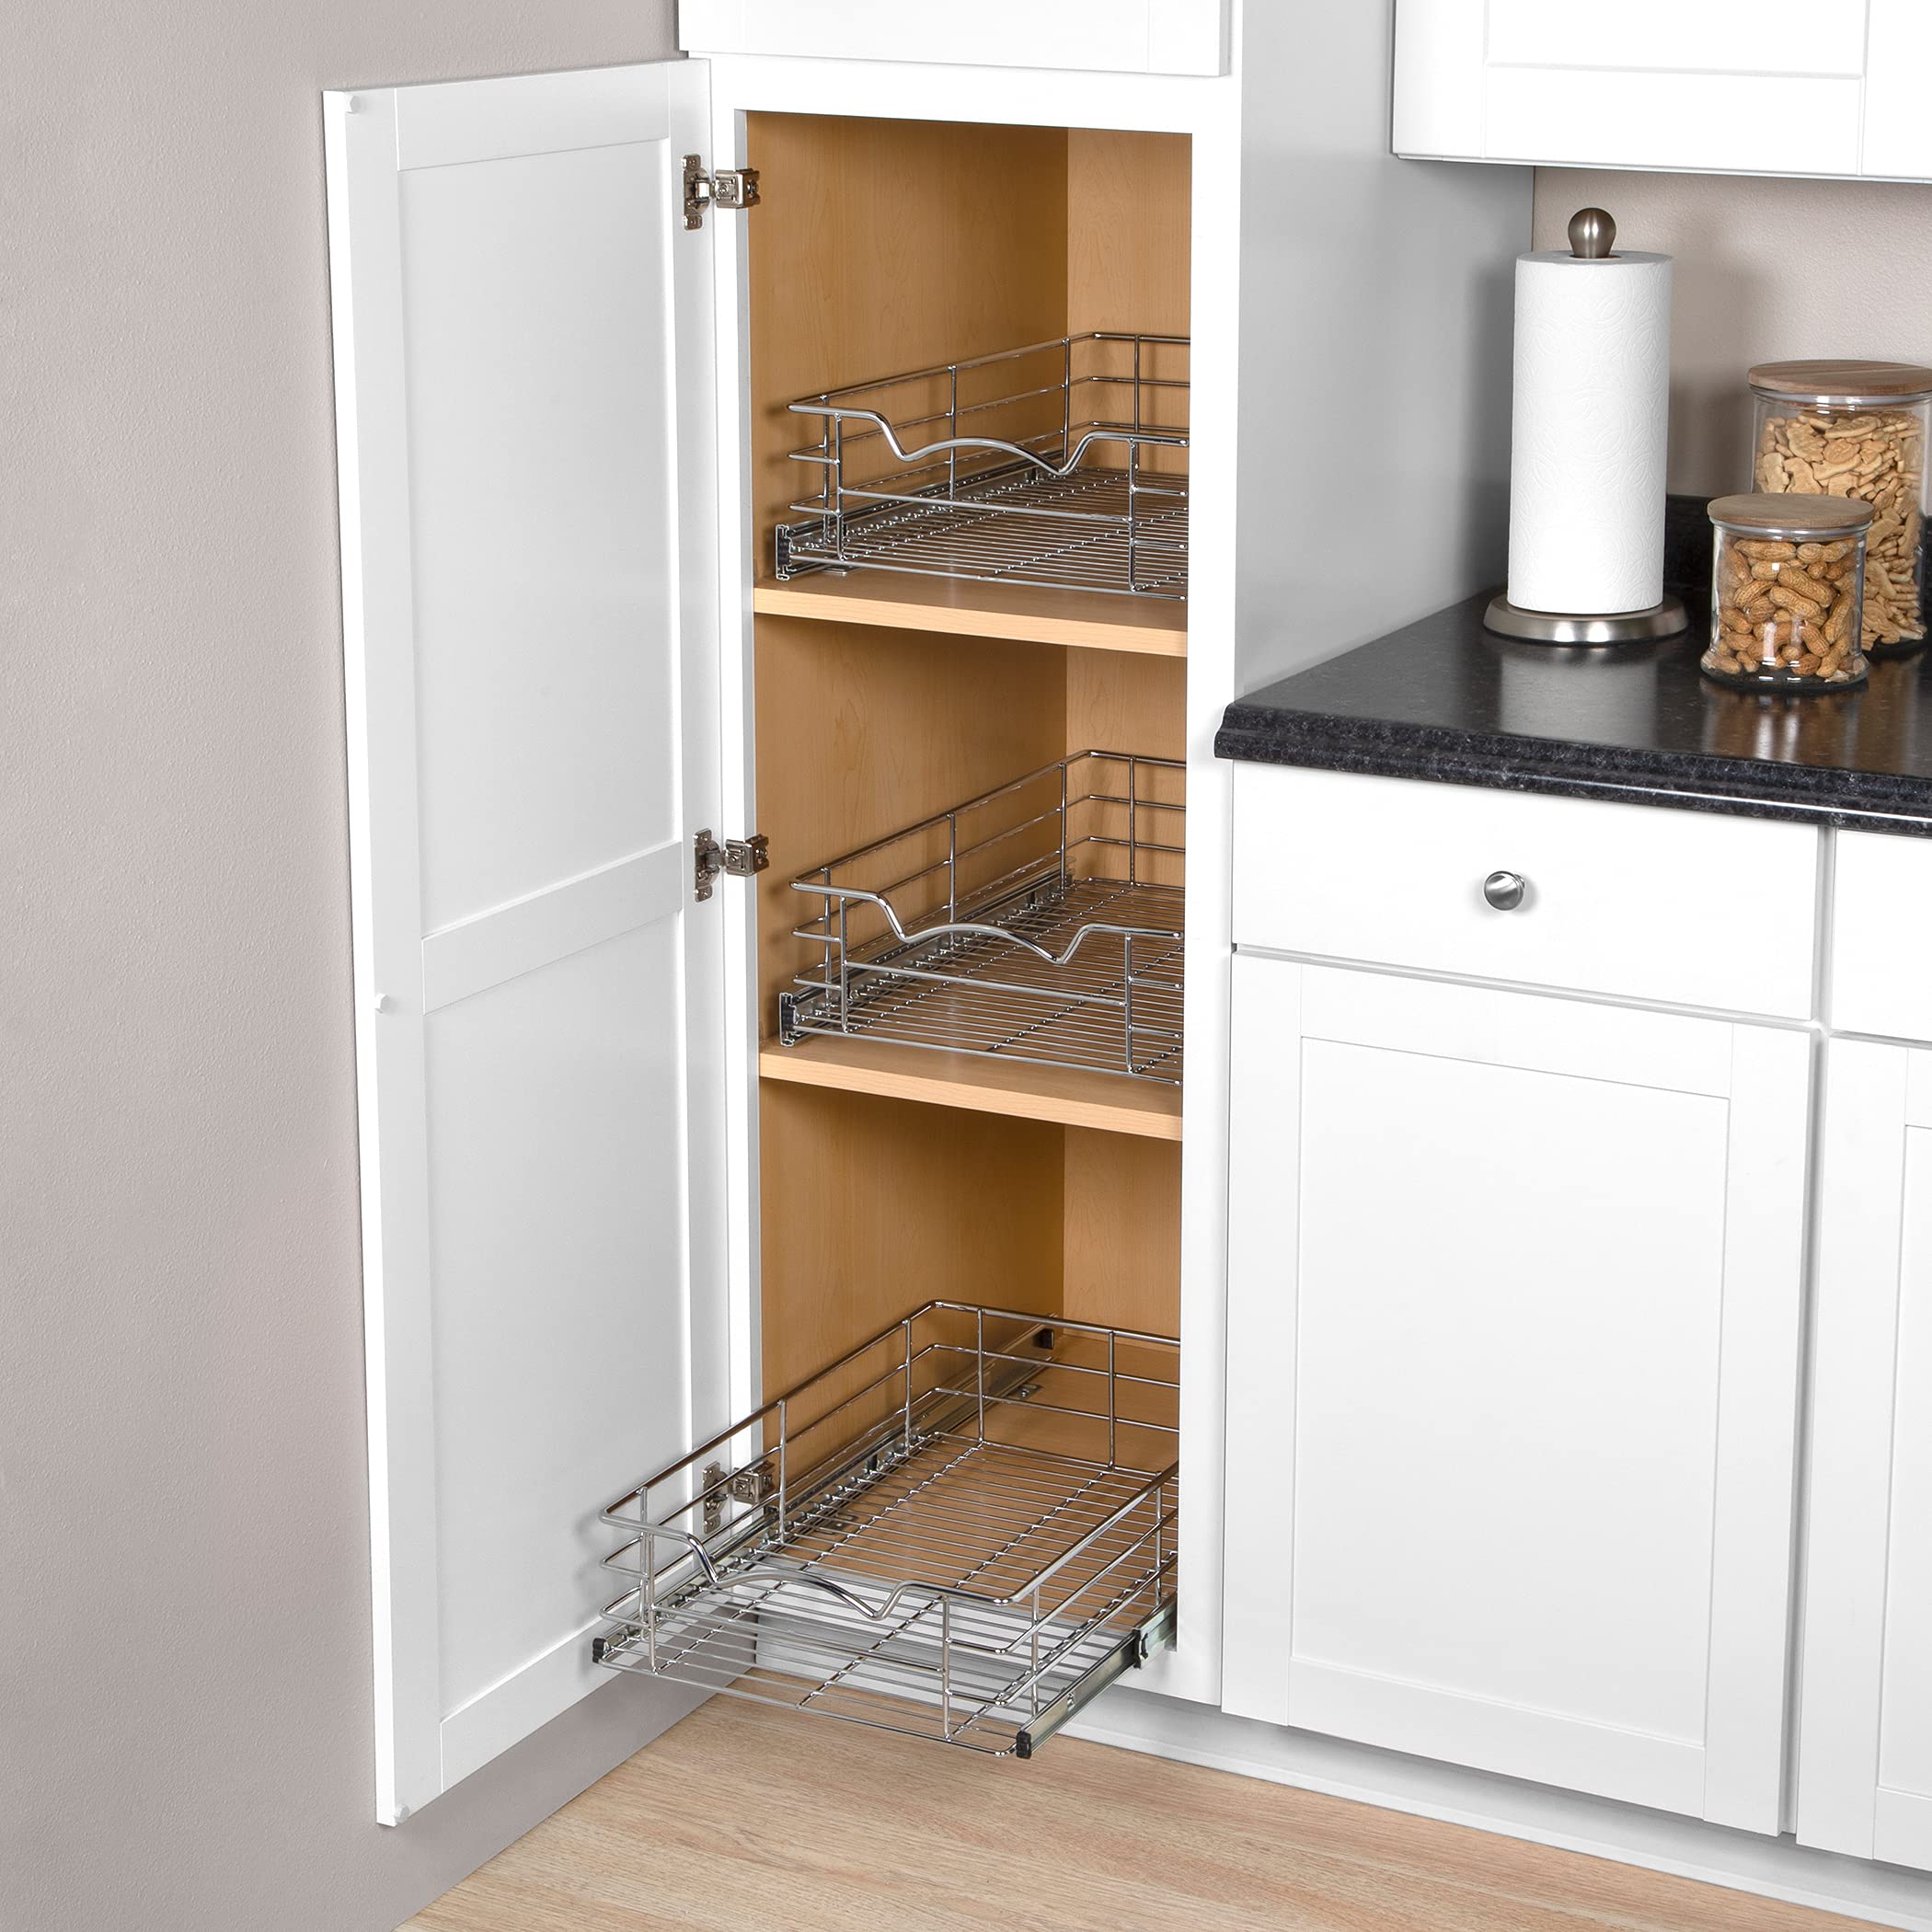 Cabinet Pull Out Shelves – 5” High Slide Out Cabinet Organizer Basket – Heavy Gauge Metal Wire - Pull Out Drawer for Kitchen Cabinets.